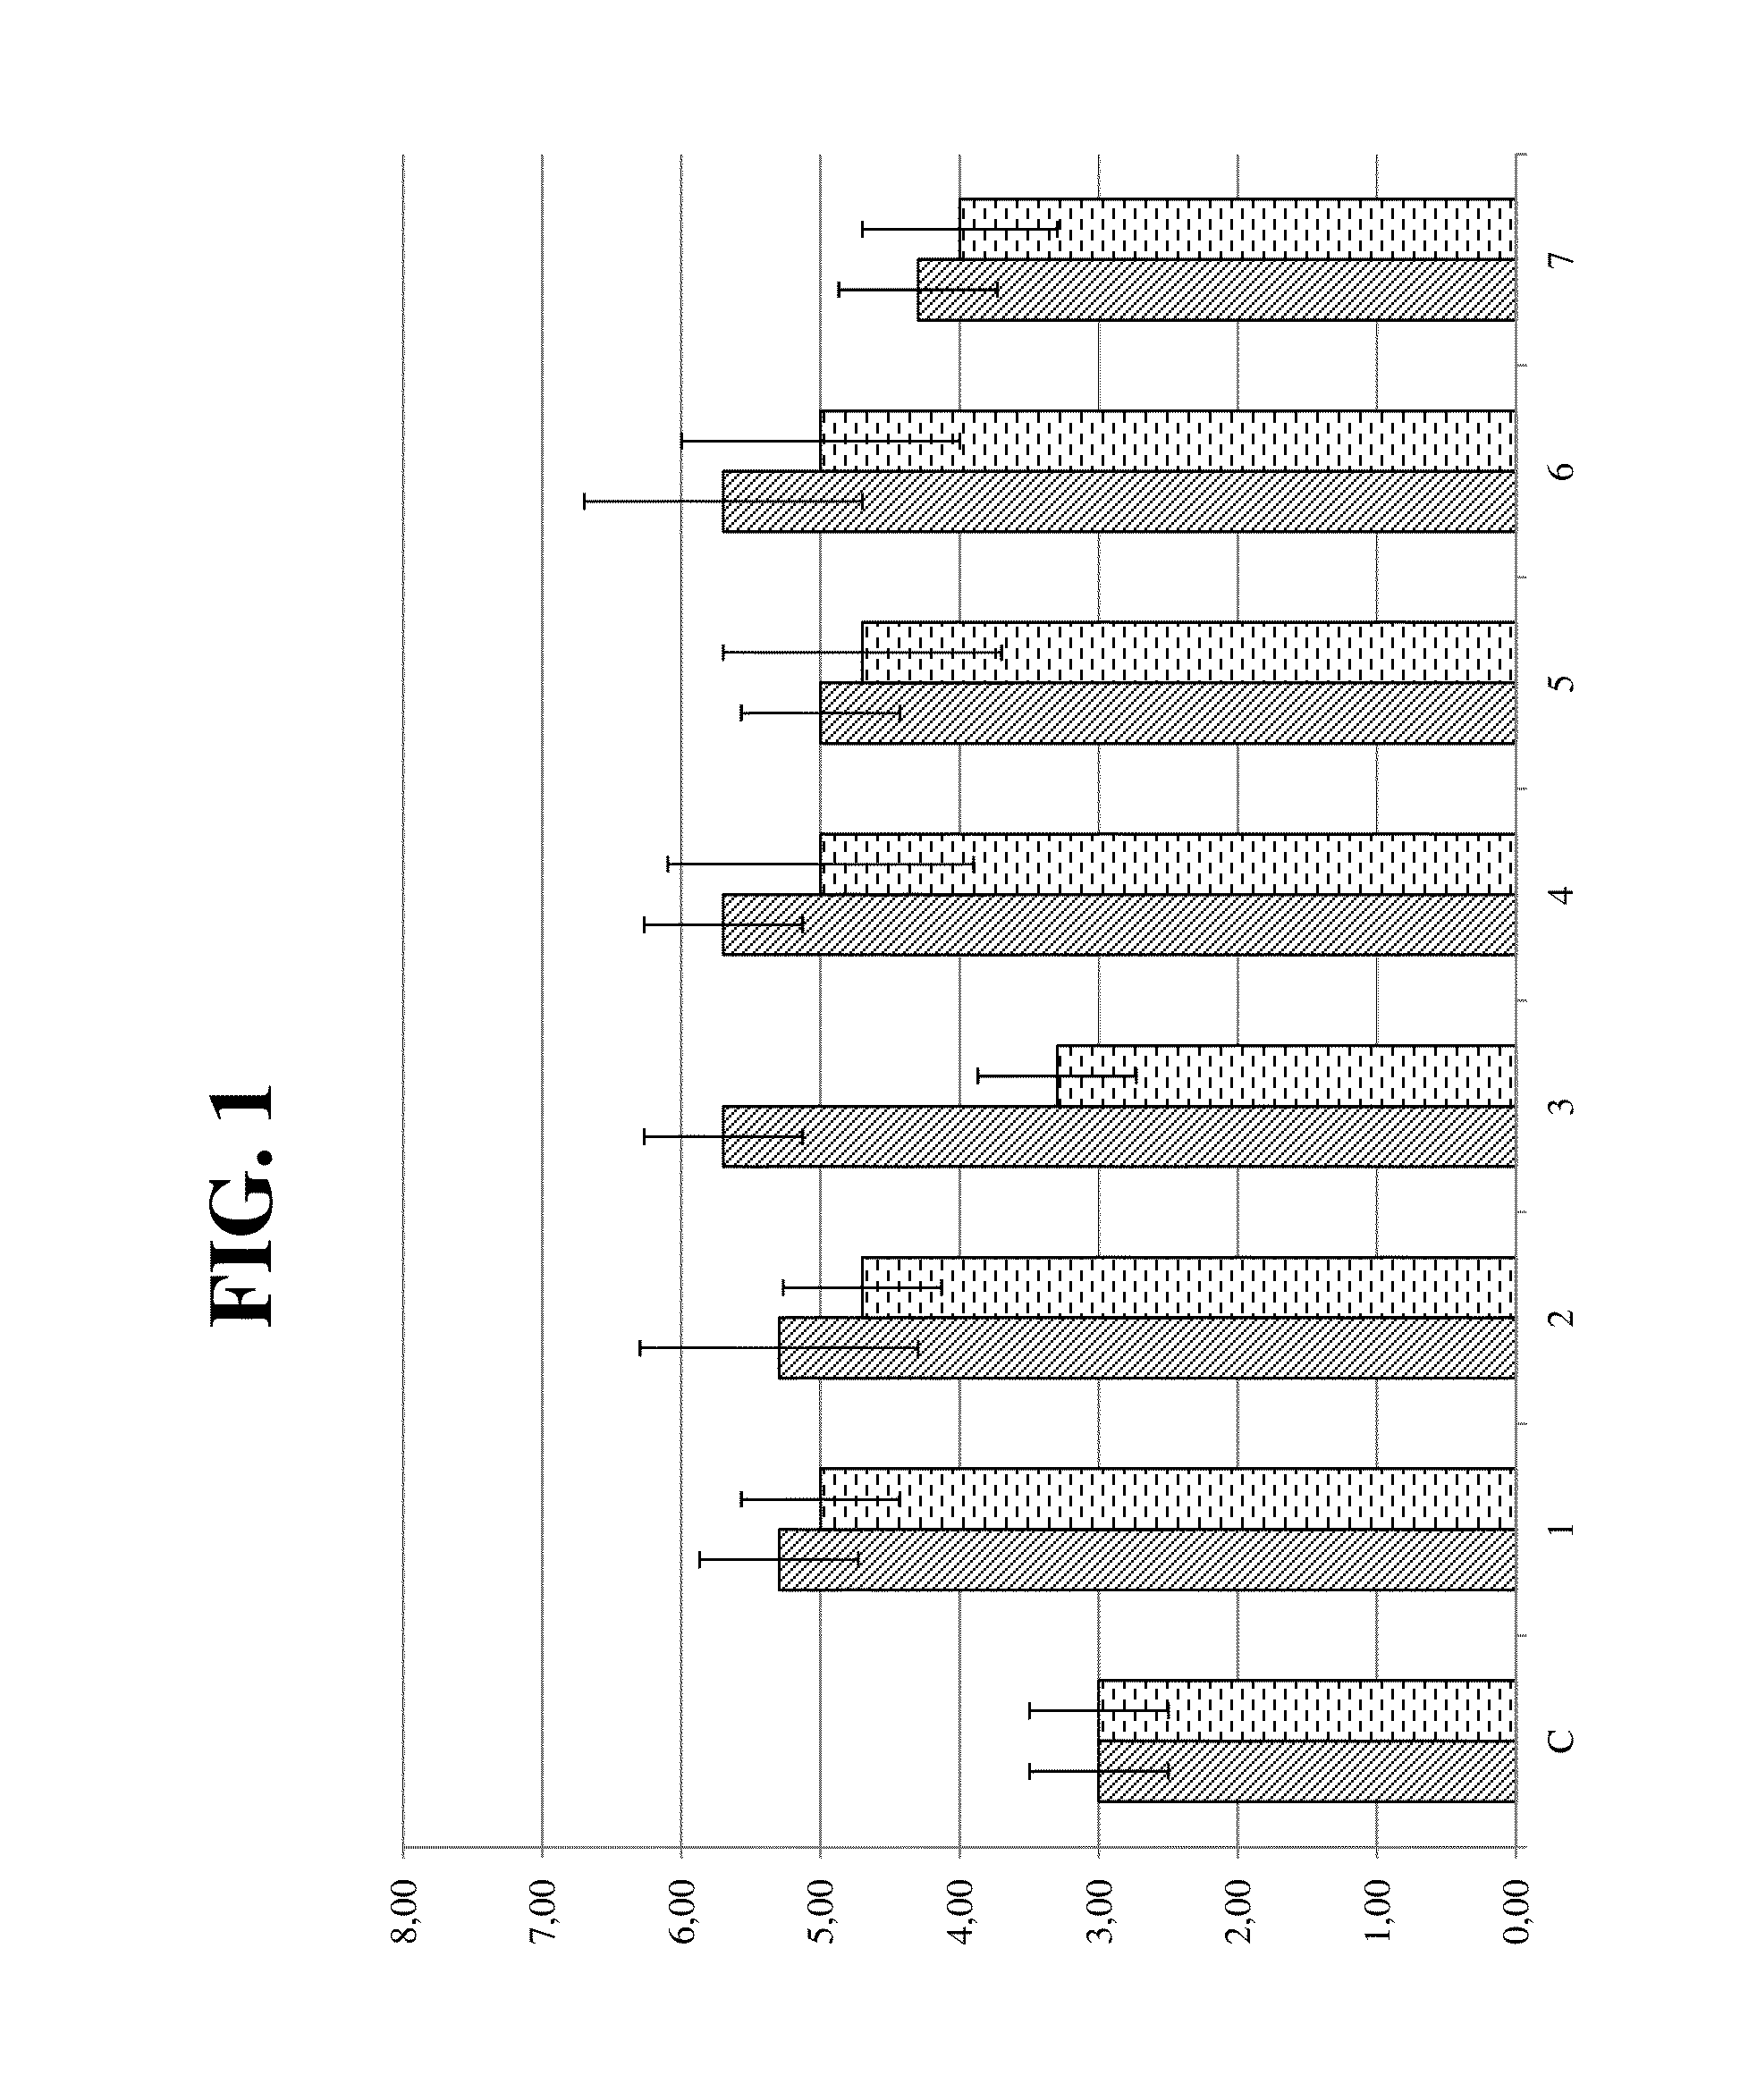 Methods for Shaping Fibrous Material and Treatment Compositions Therefor